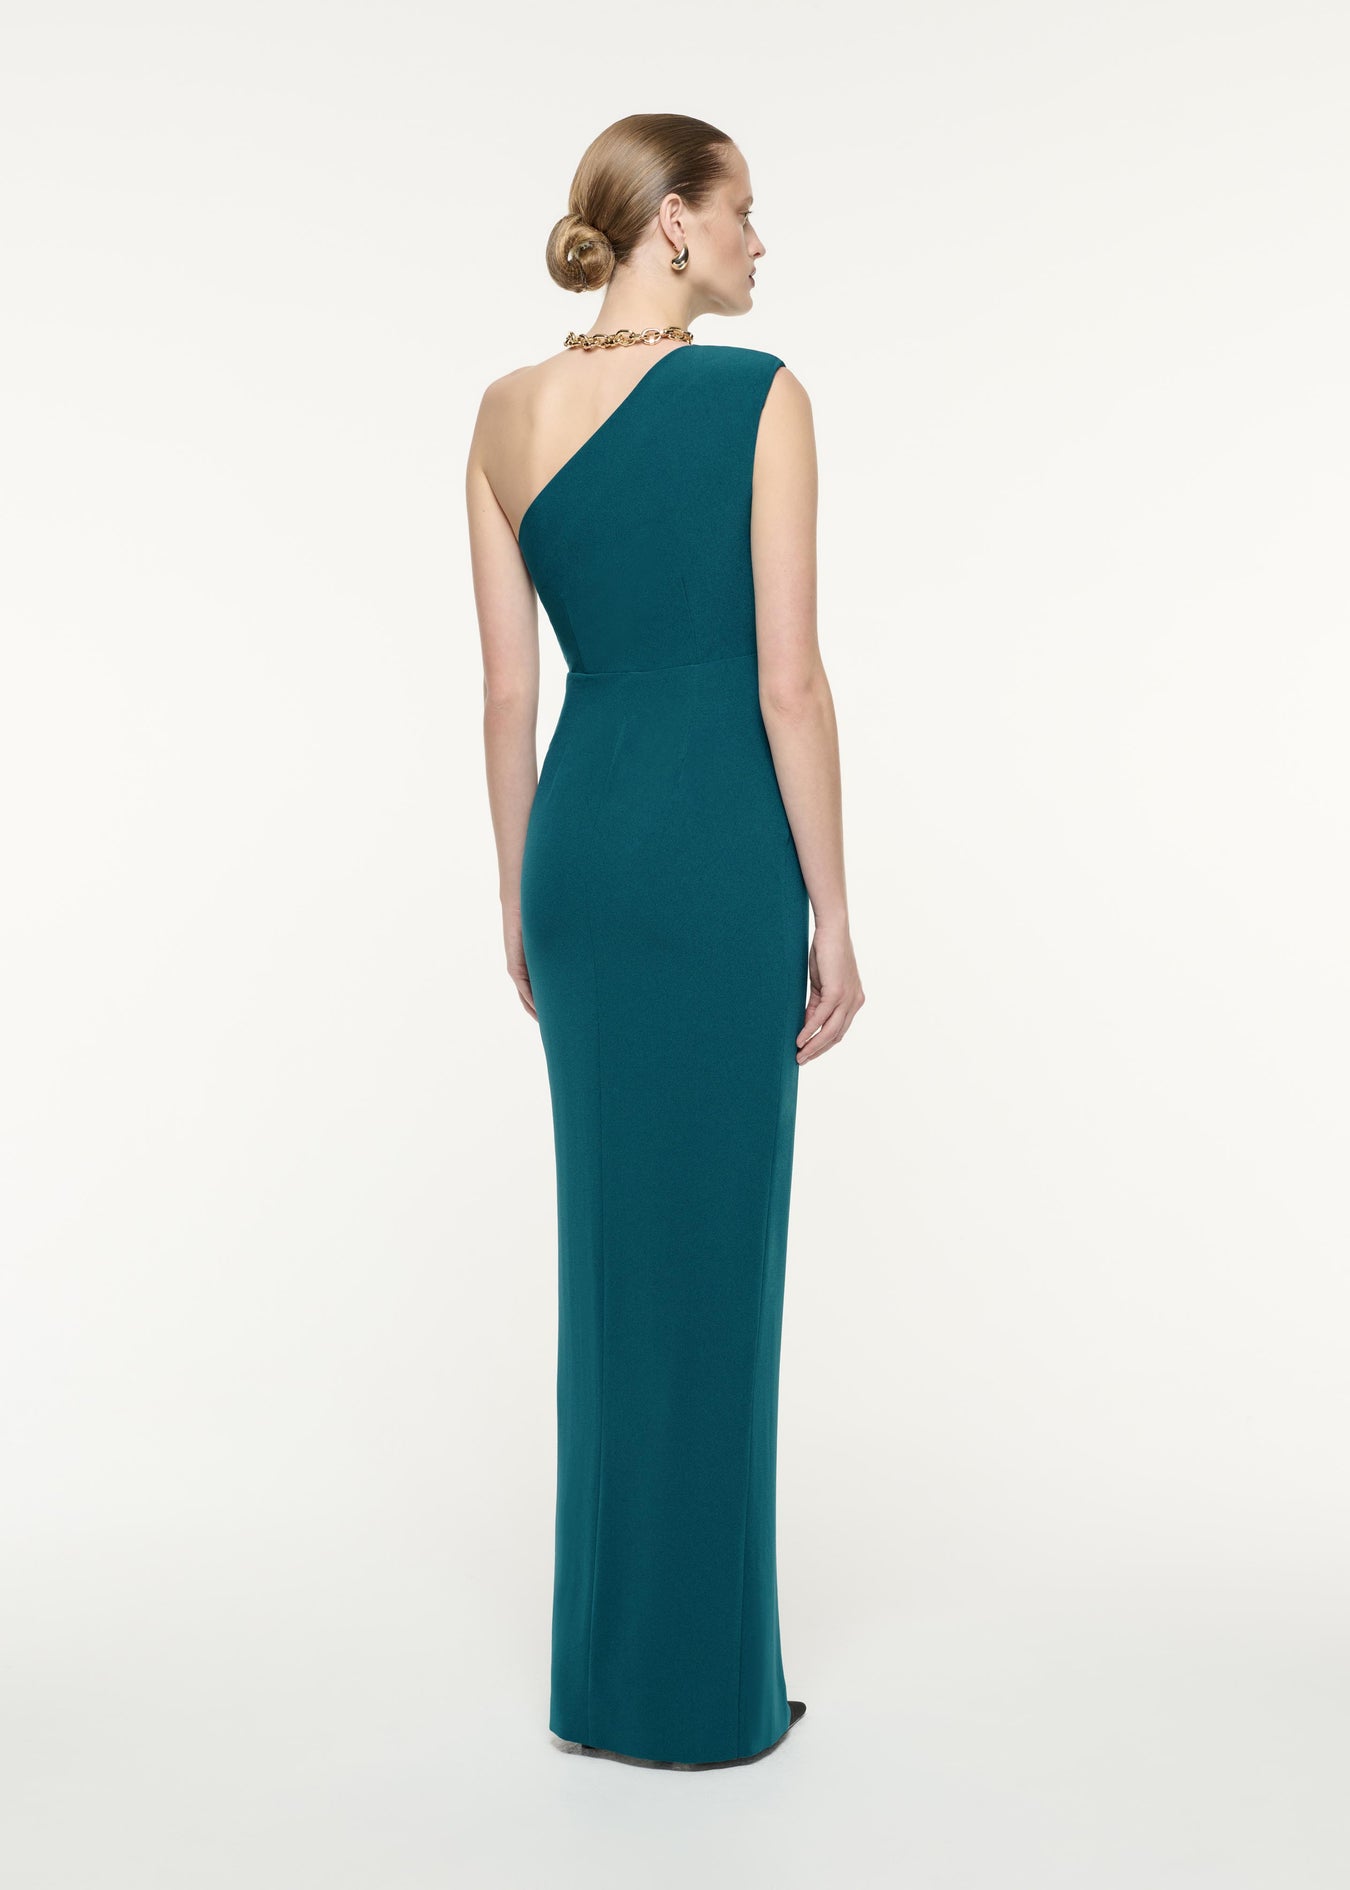 A back view image of a model wearing the Asymmetric Satin Crepe Maxi Dress in Green